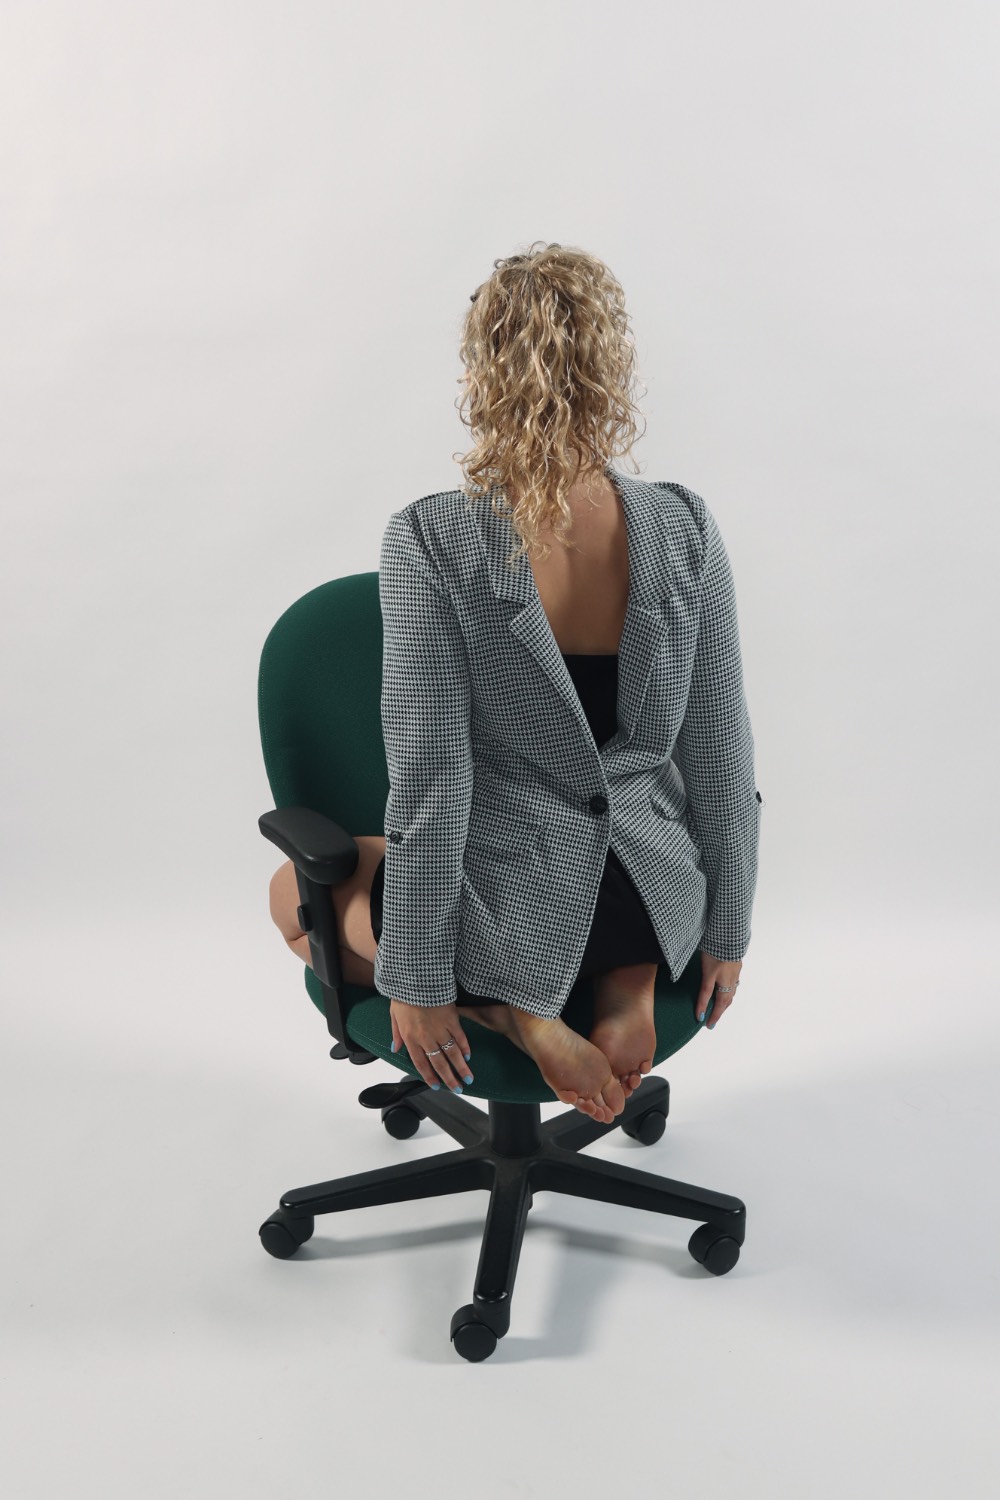 A woman kneeling on a chair backwards wearing her business attire backwards.